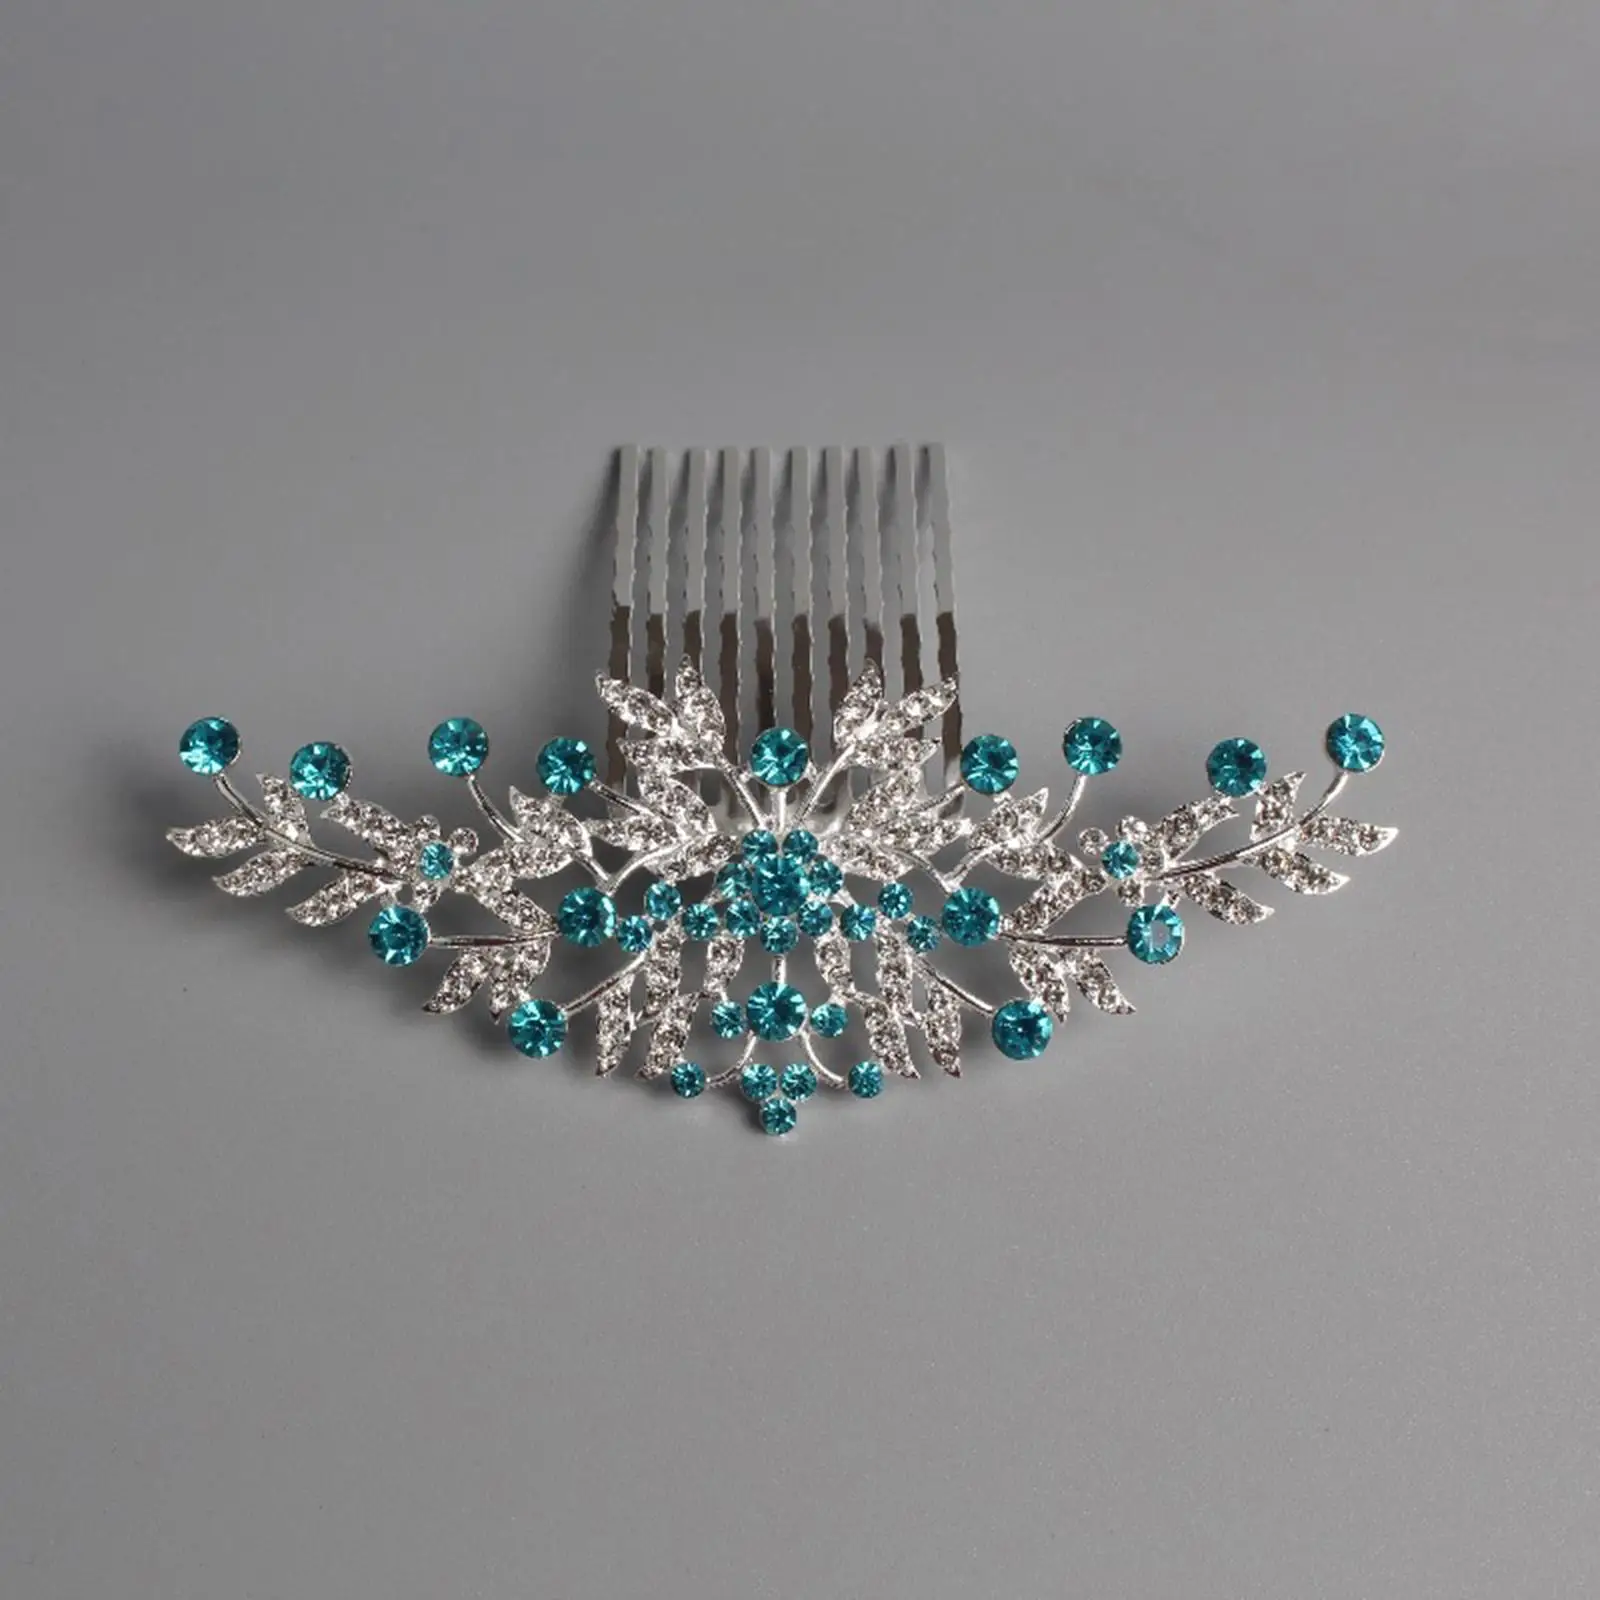 Bride Wedding Hair Comb for Women Girls Bridesmaid Hair Accessories Bridal Hairpiece Decorative Hair Jewelry Bridal Side Comb